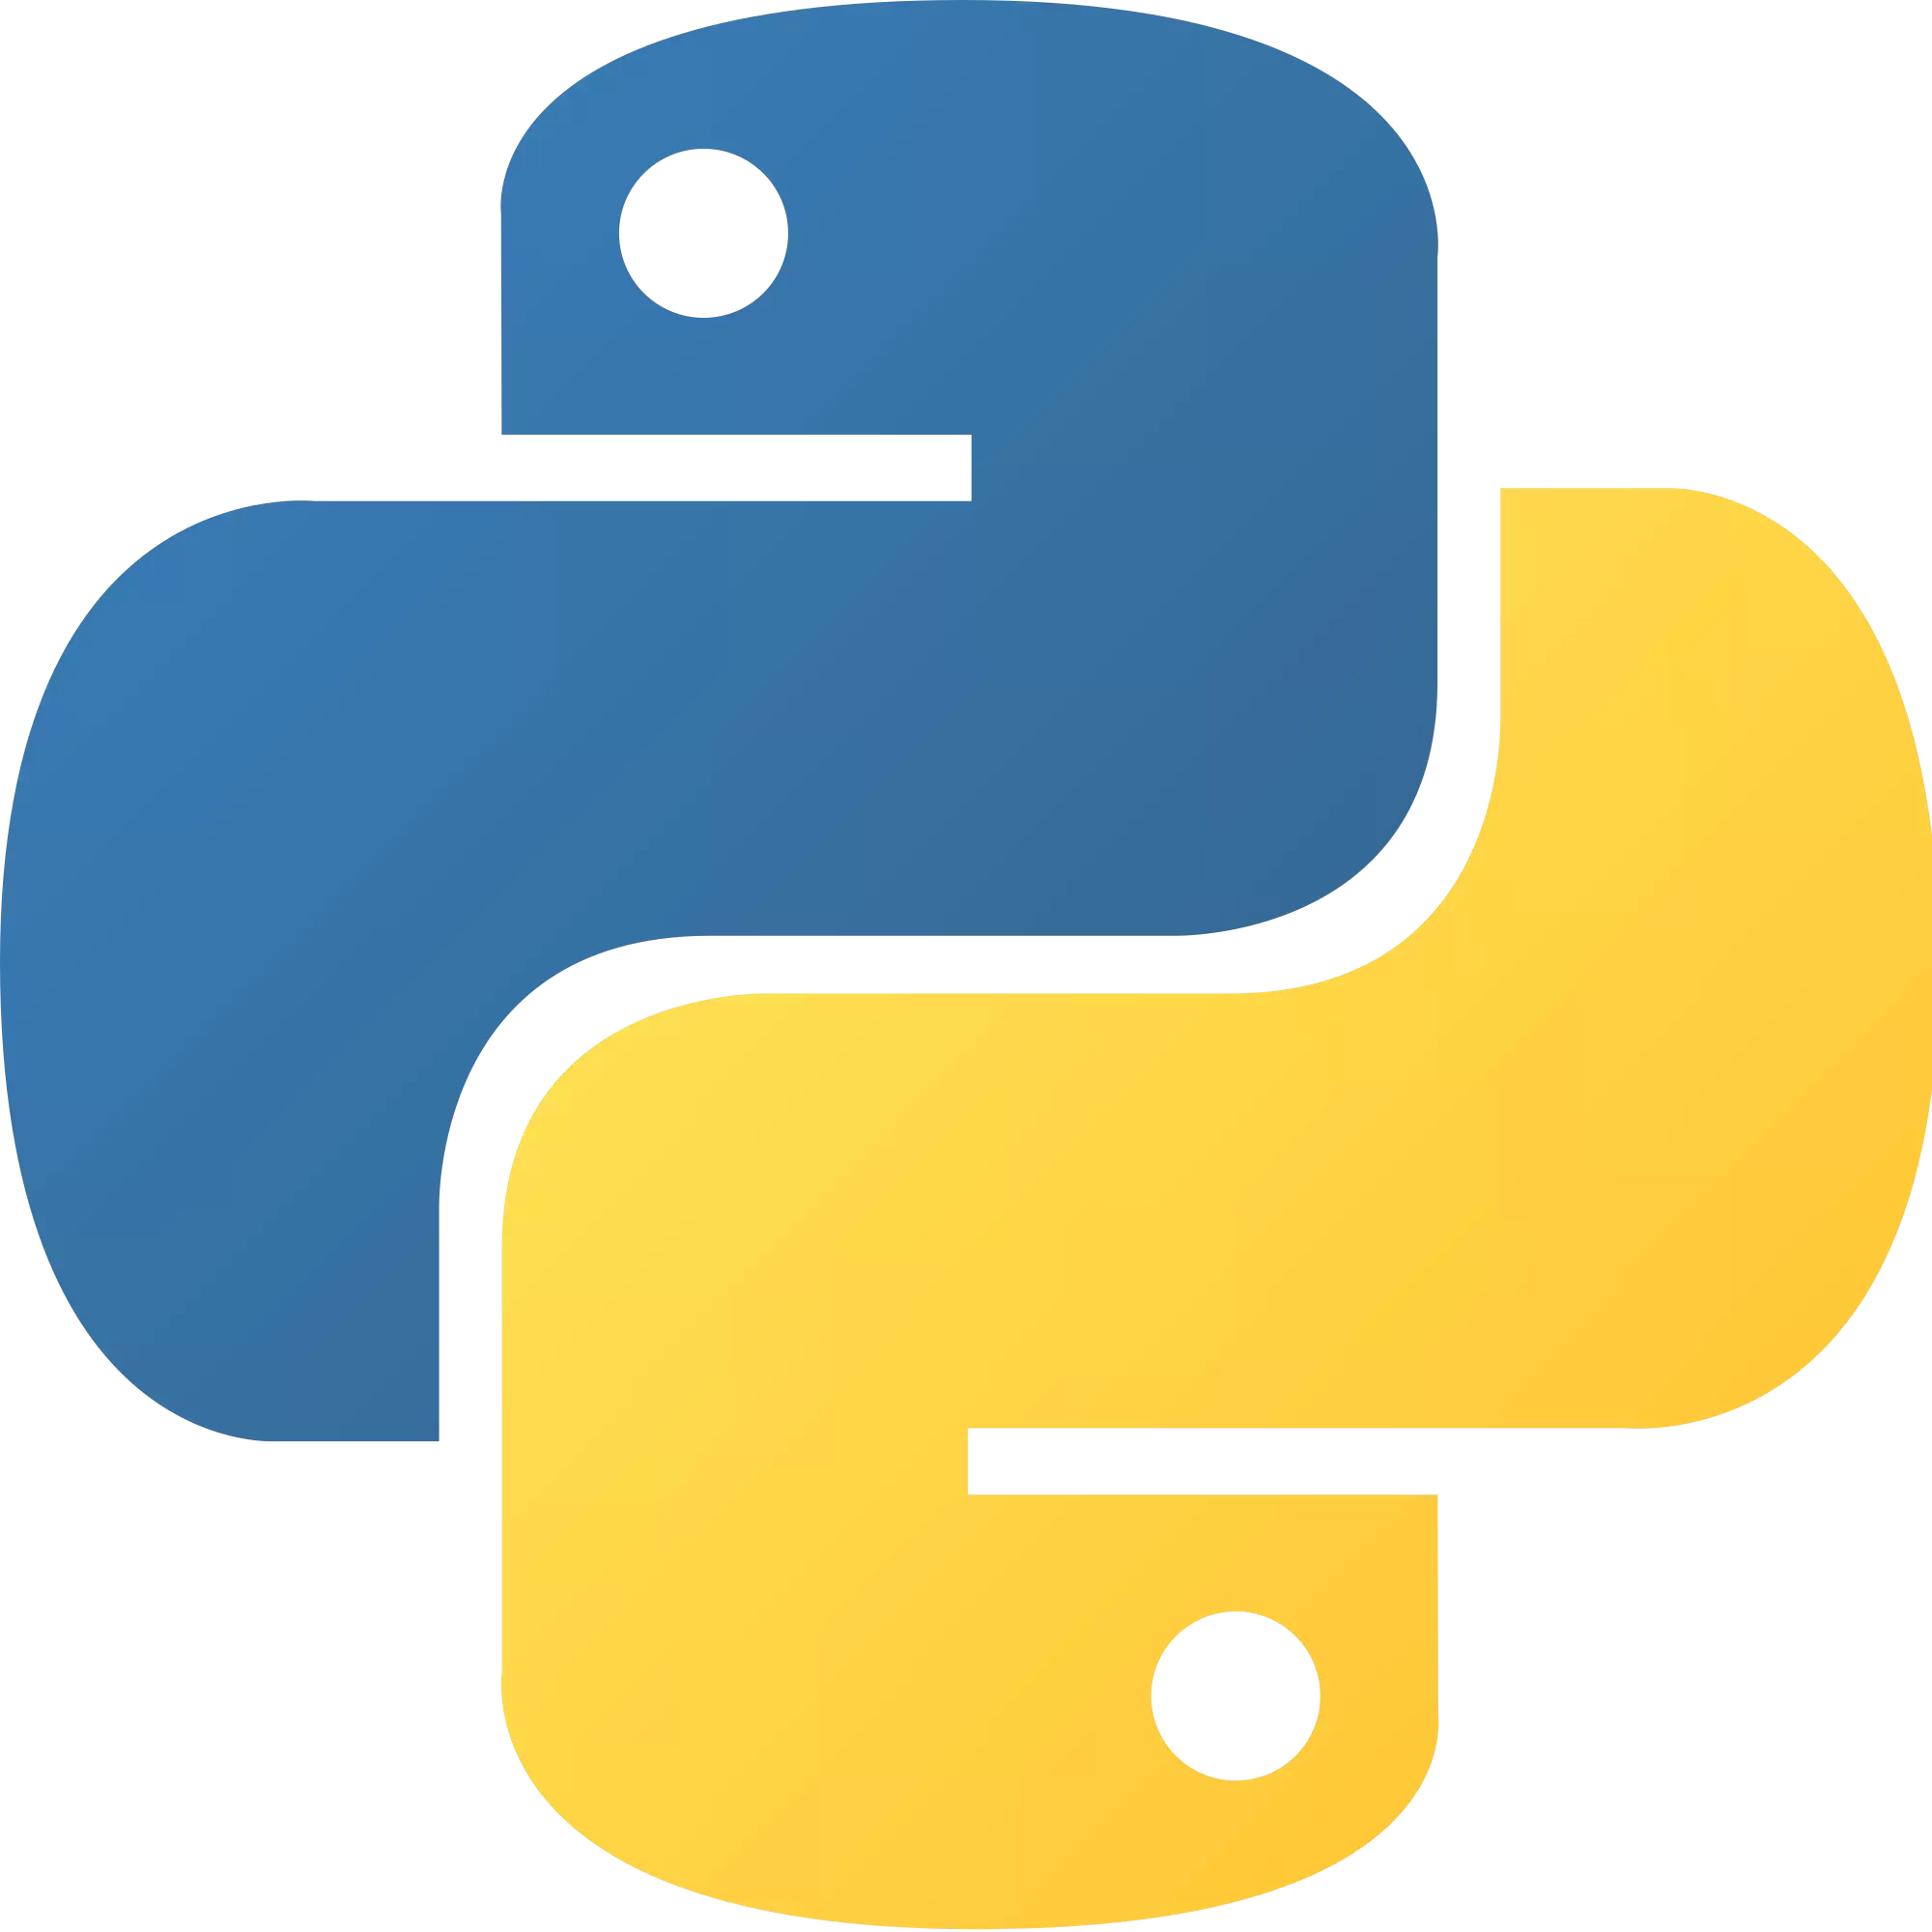 Python Snippets for VSCode